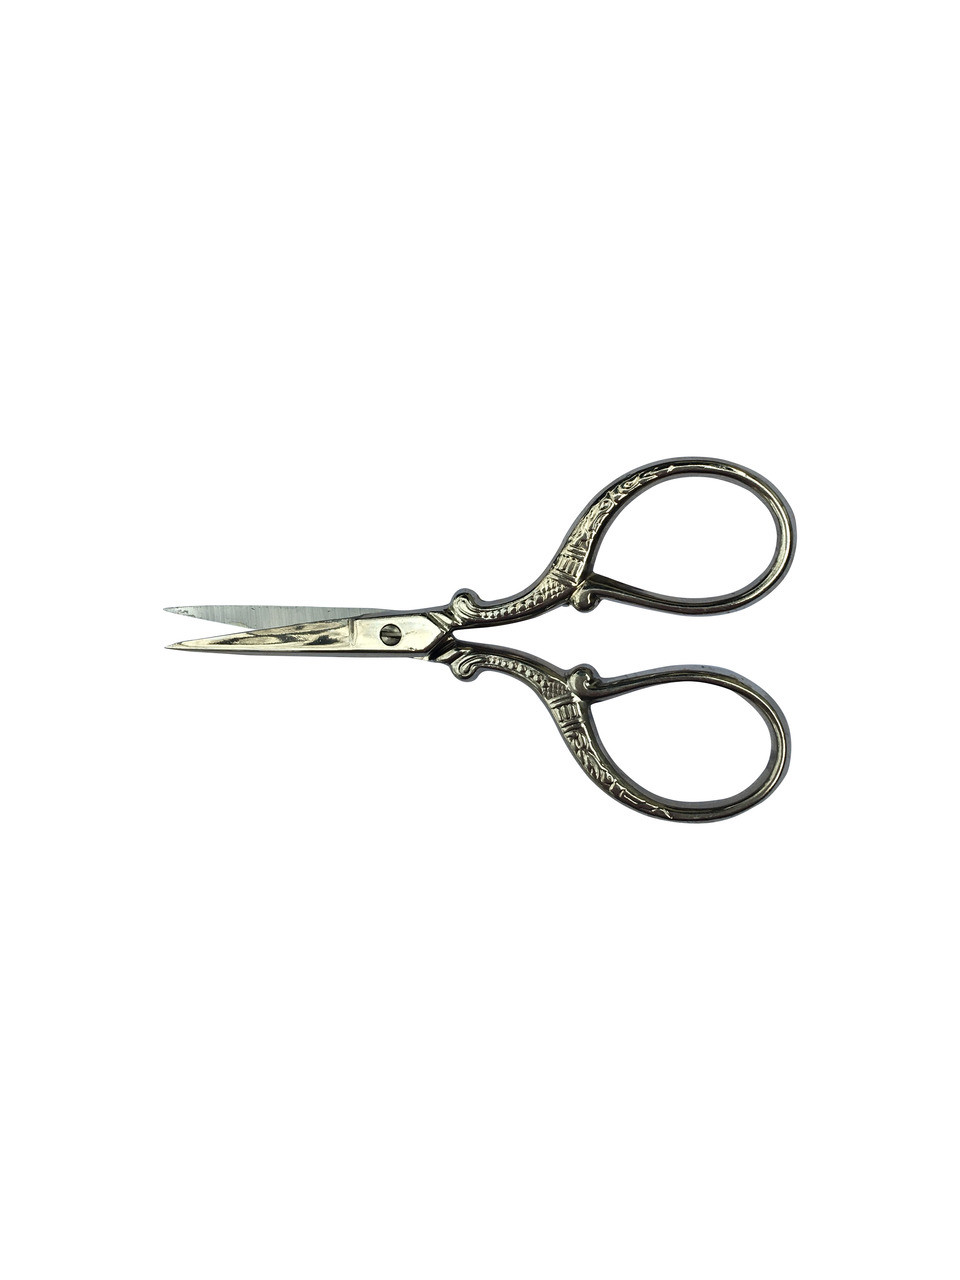 10 Tailors Fabric Shears - Tooltron Industries, Inc.